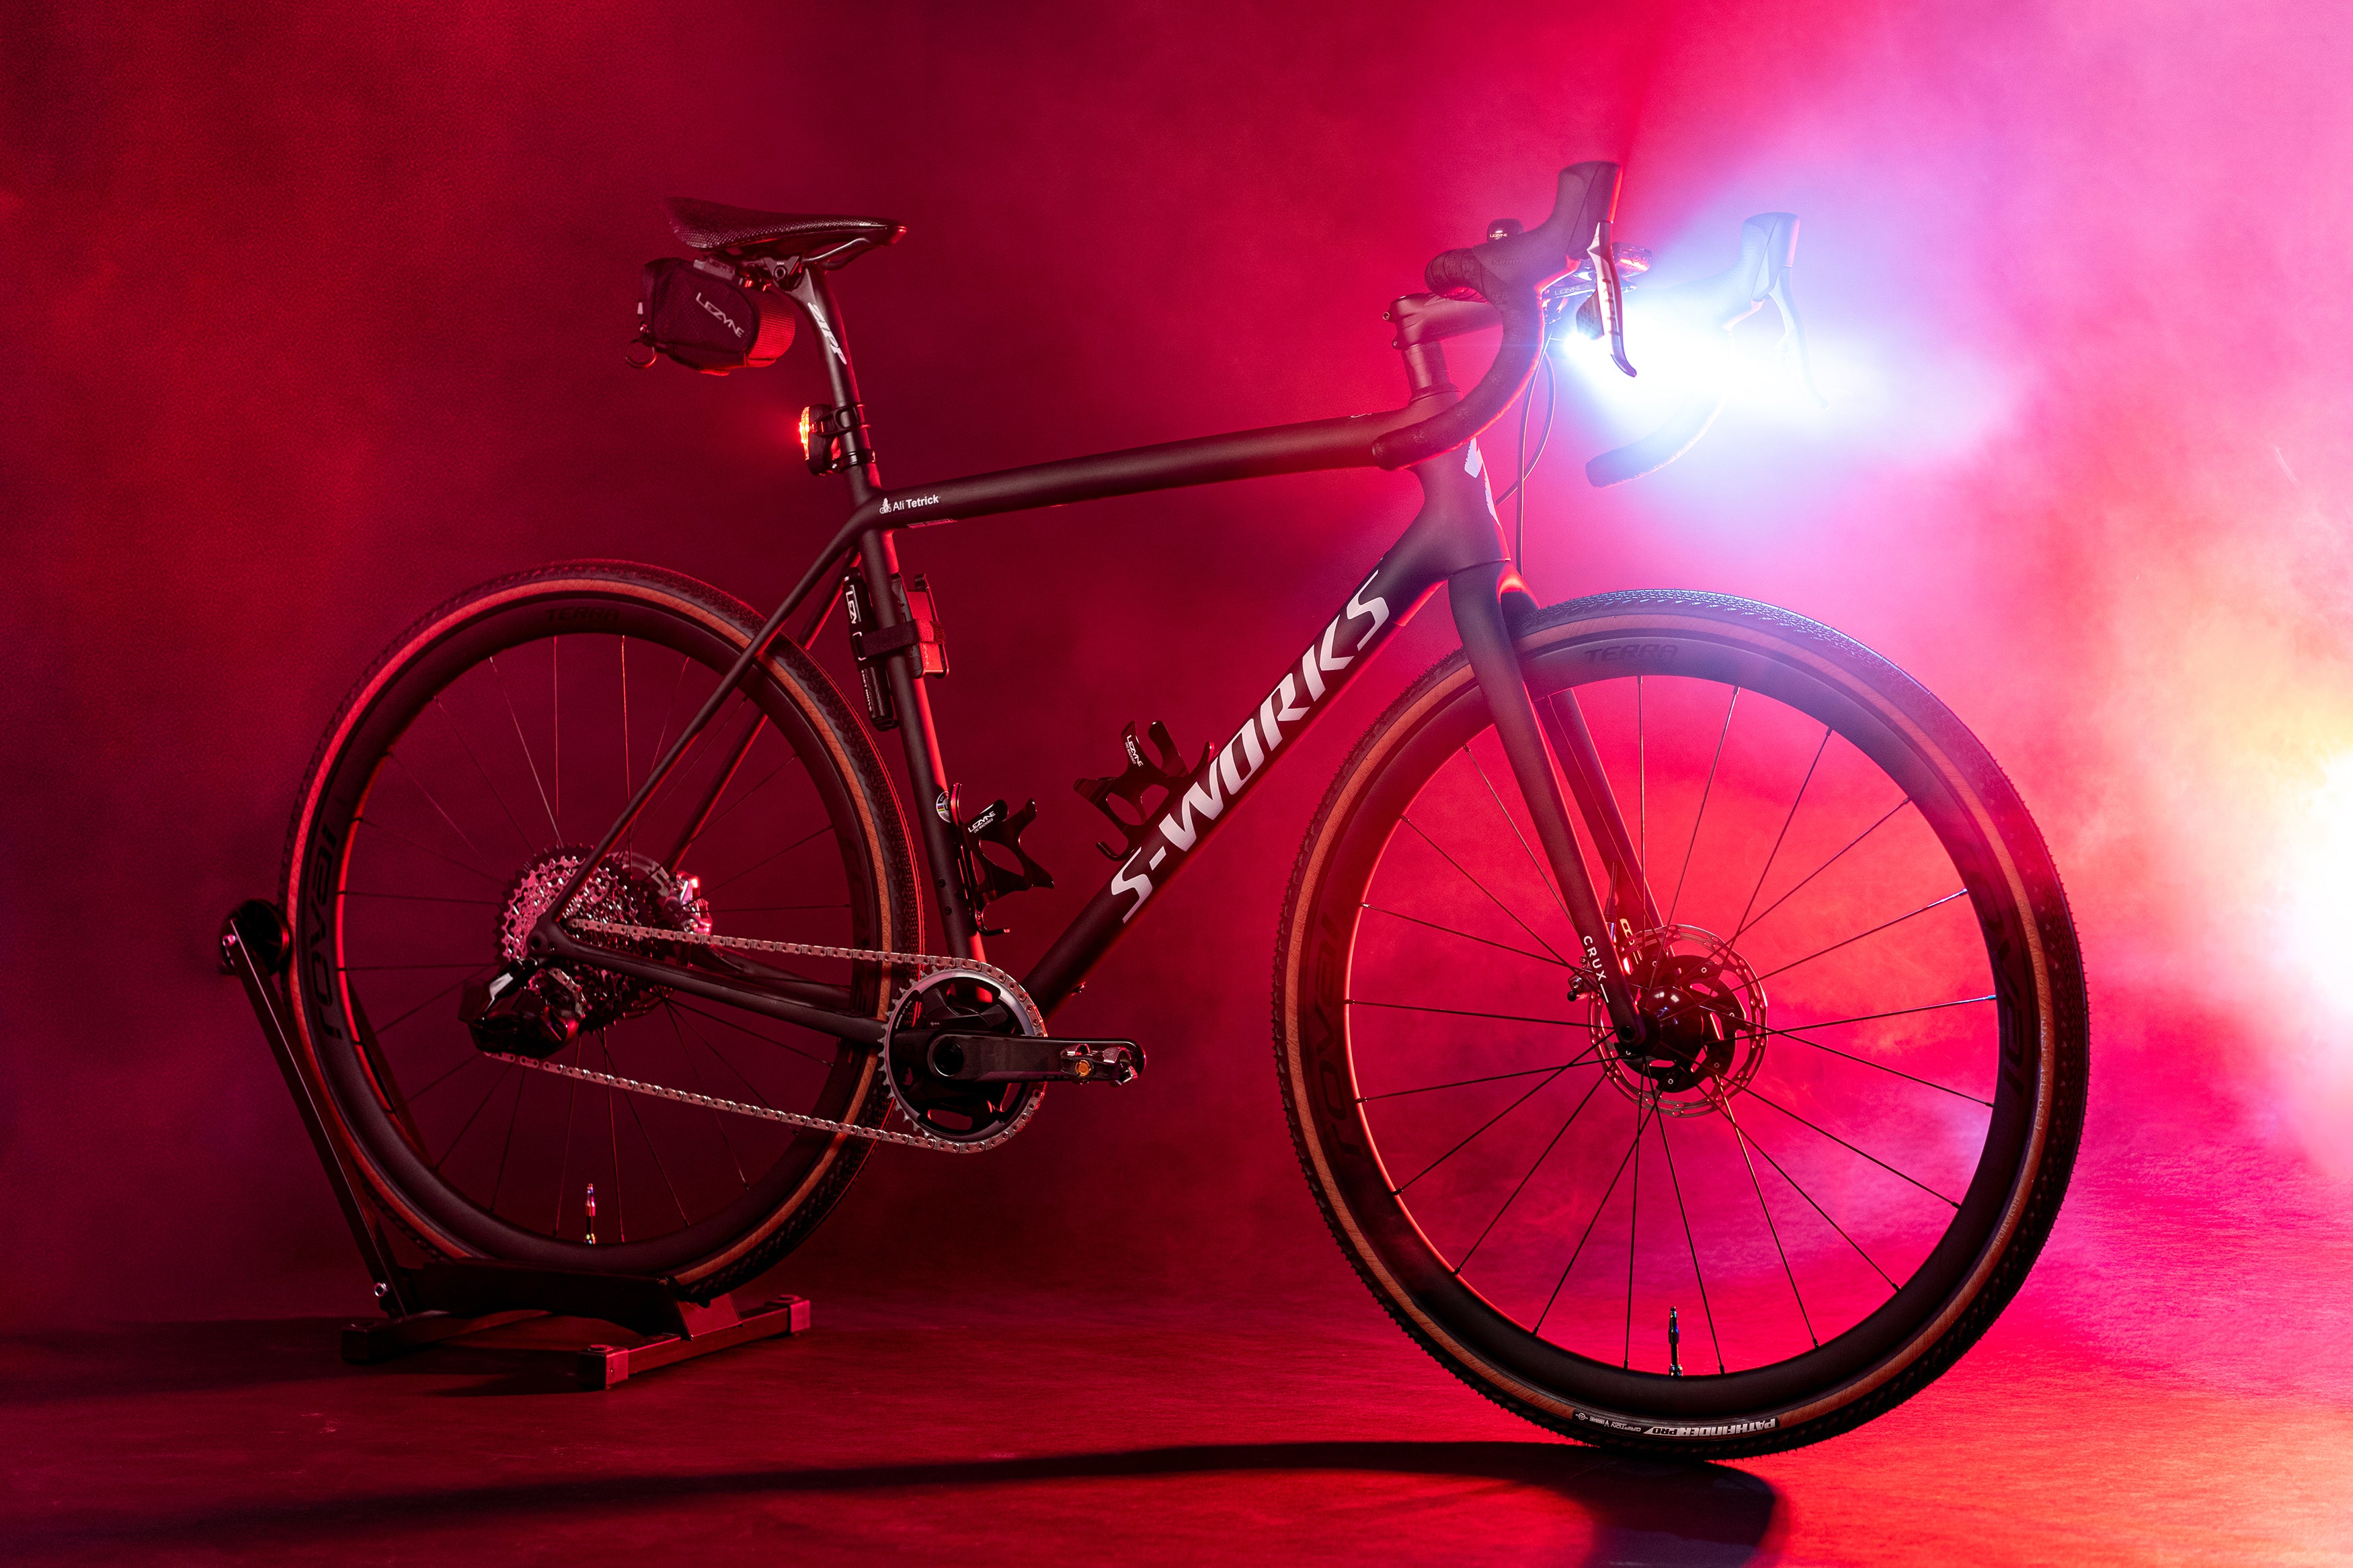 A bicycle in a red foggy environment with the word S-Works printed on it.